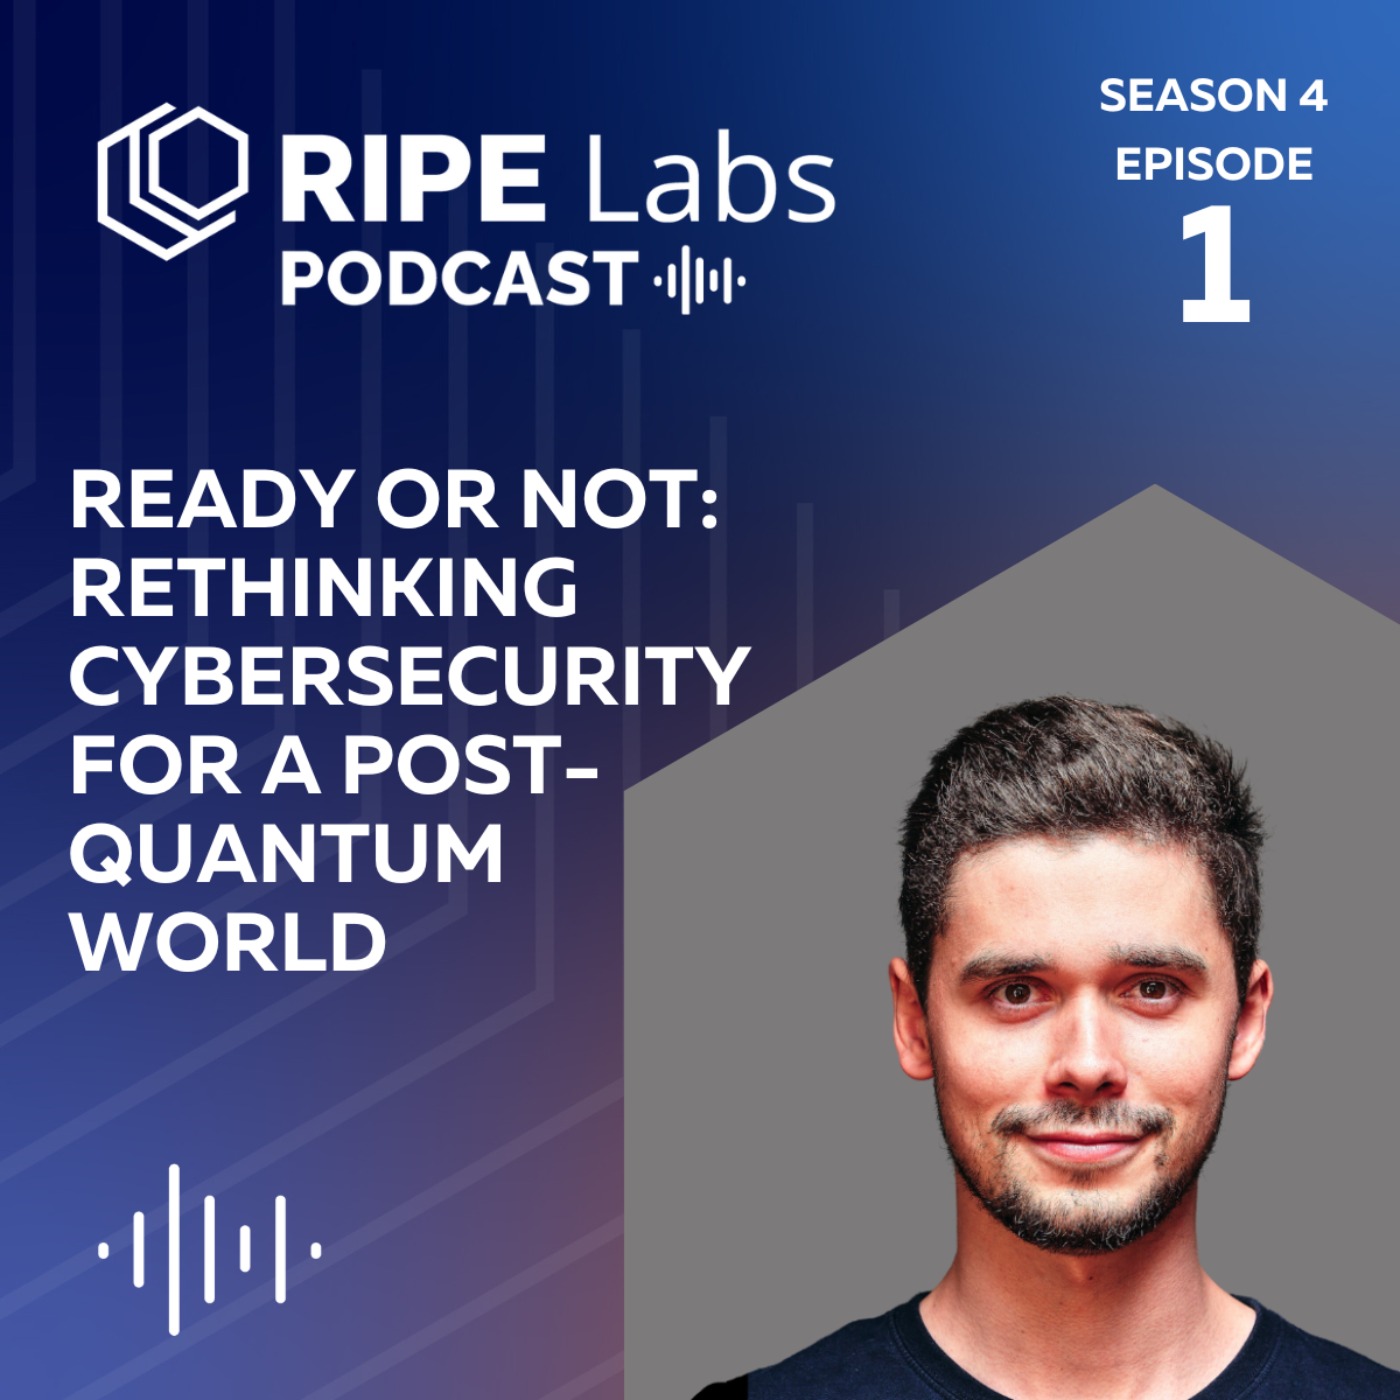 Ready or Not - Rethinking Cybersecurity for a Post-Quantum World